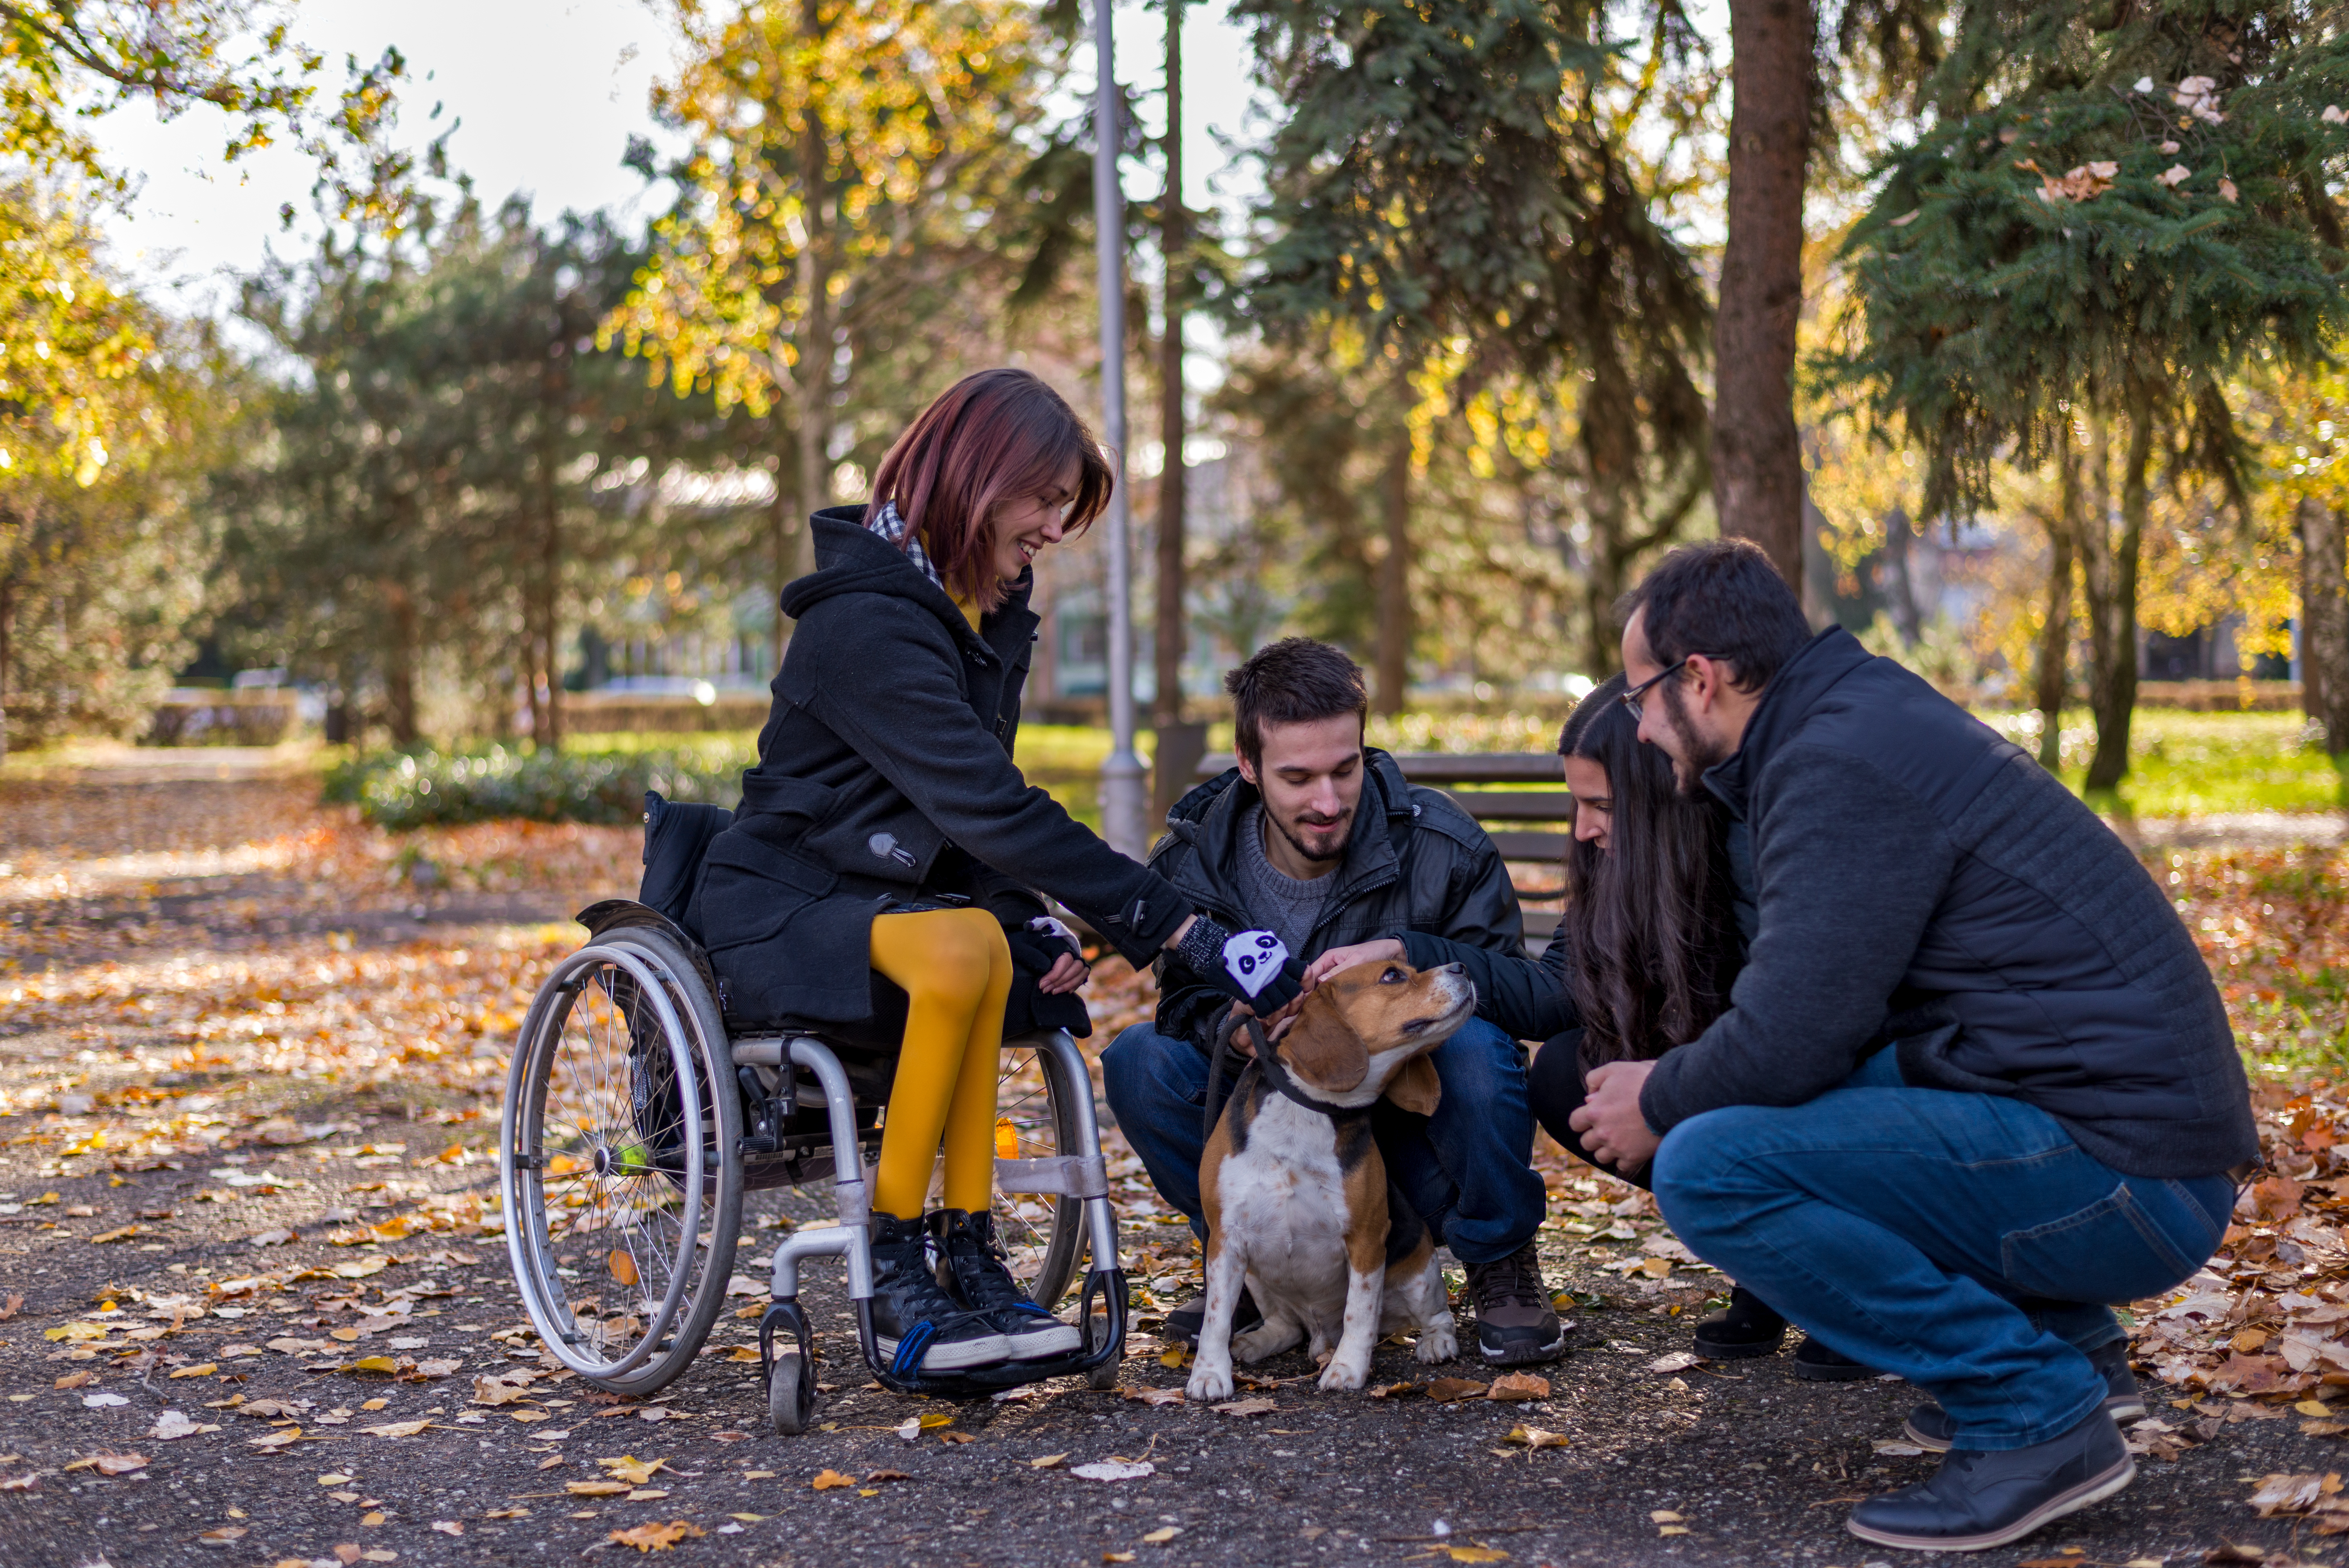 A disabled girl in a wheelchair playing with friends and dog in the park